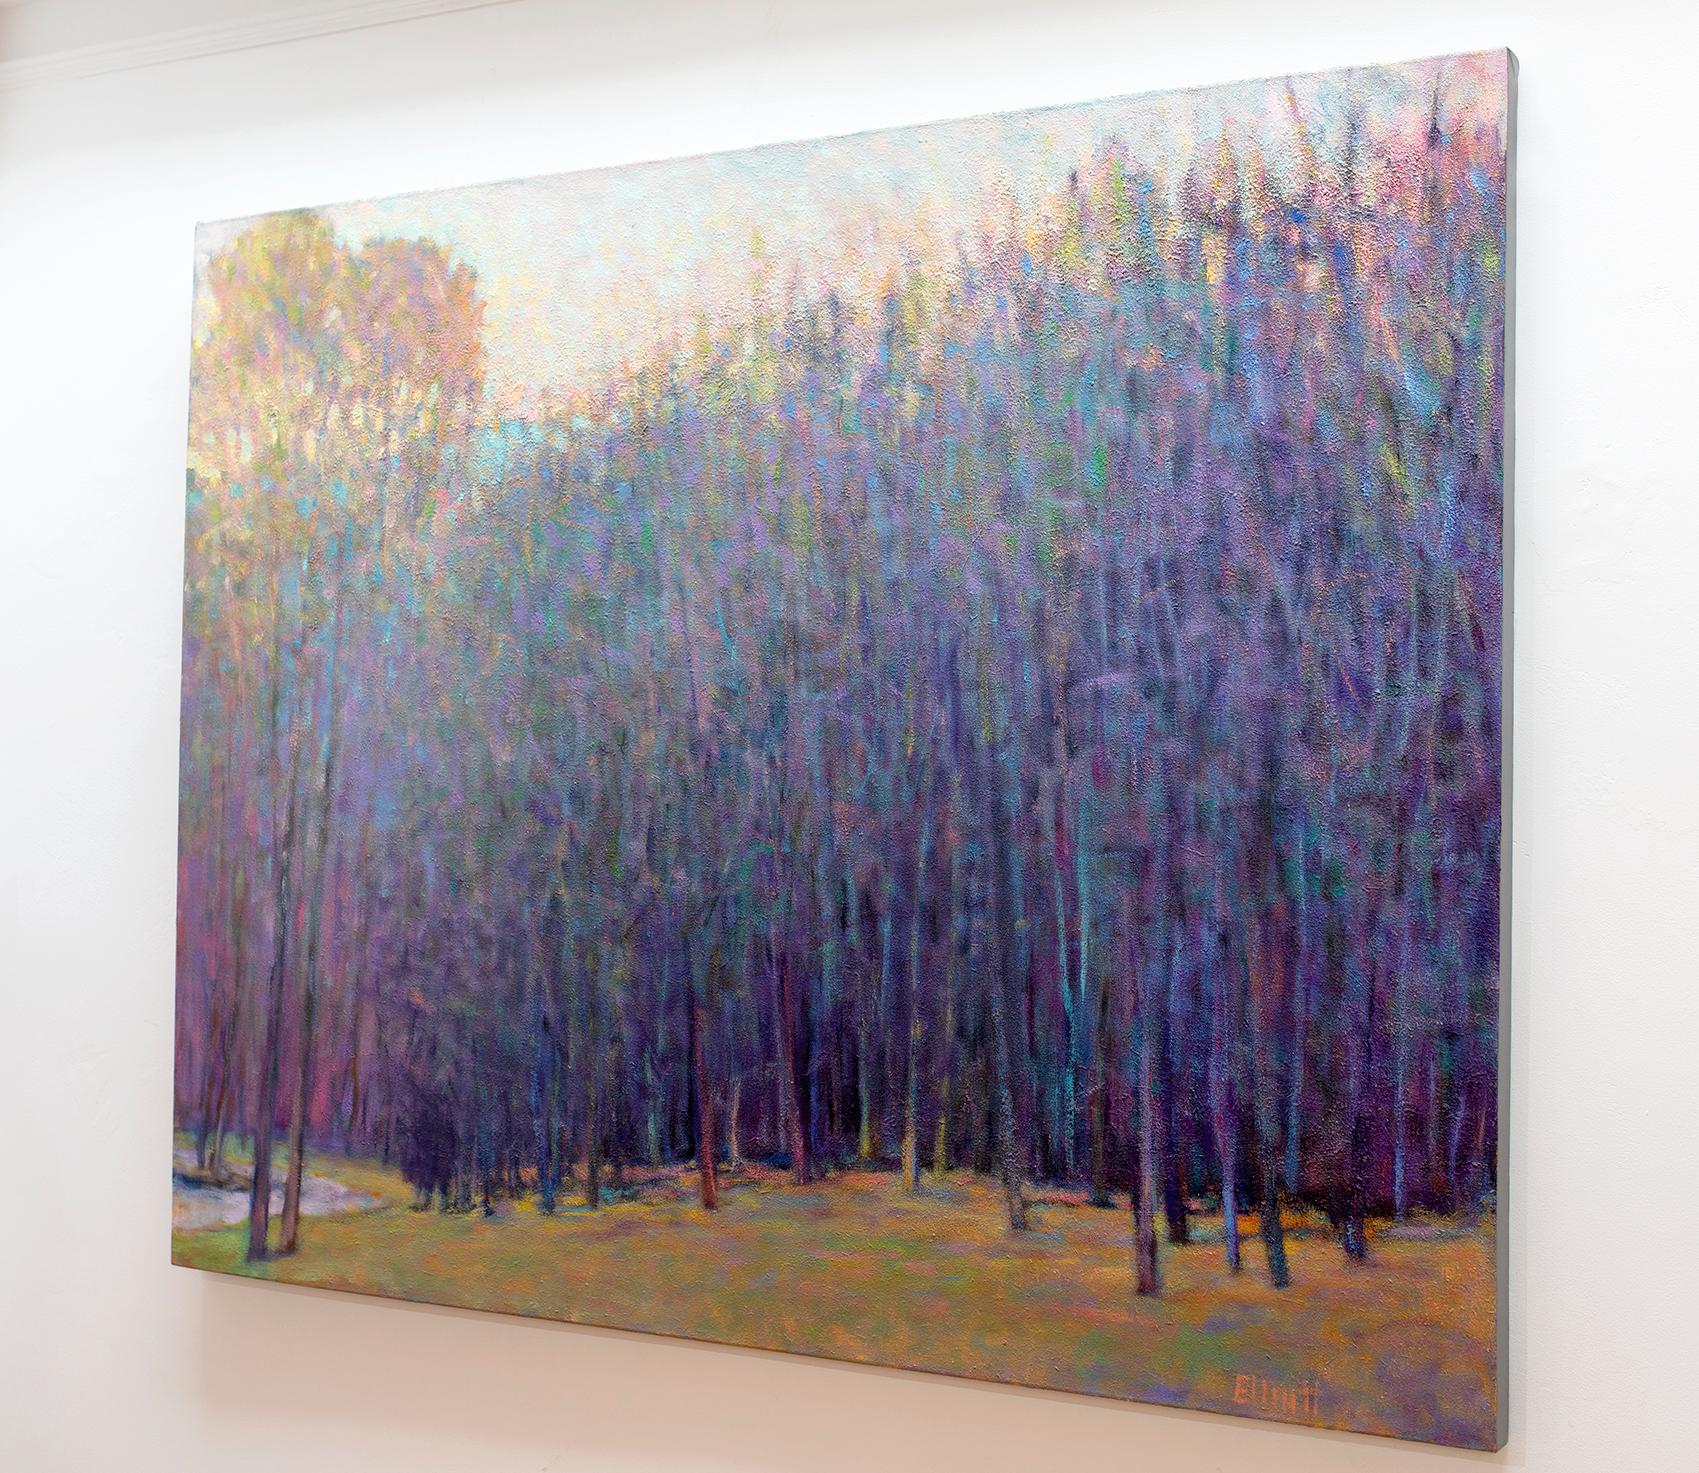 Landscape, vivid, color, American Impressionism, brush strokes, layer, rainbow, forest, trees, woods, navy, green, yellow, contemporary, transitional, interior design, interior decor, wolf kahn

ABOUT KEN ELLIOTT
My involvement in the art business